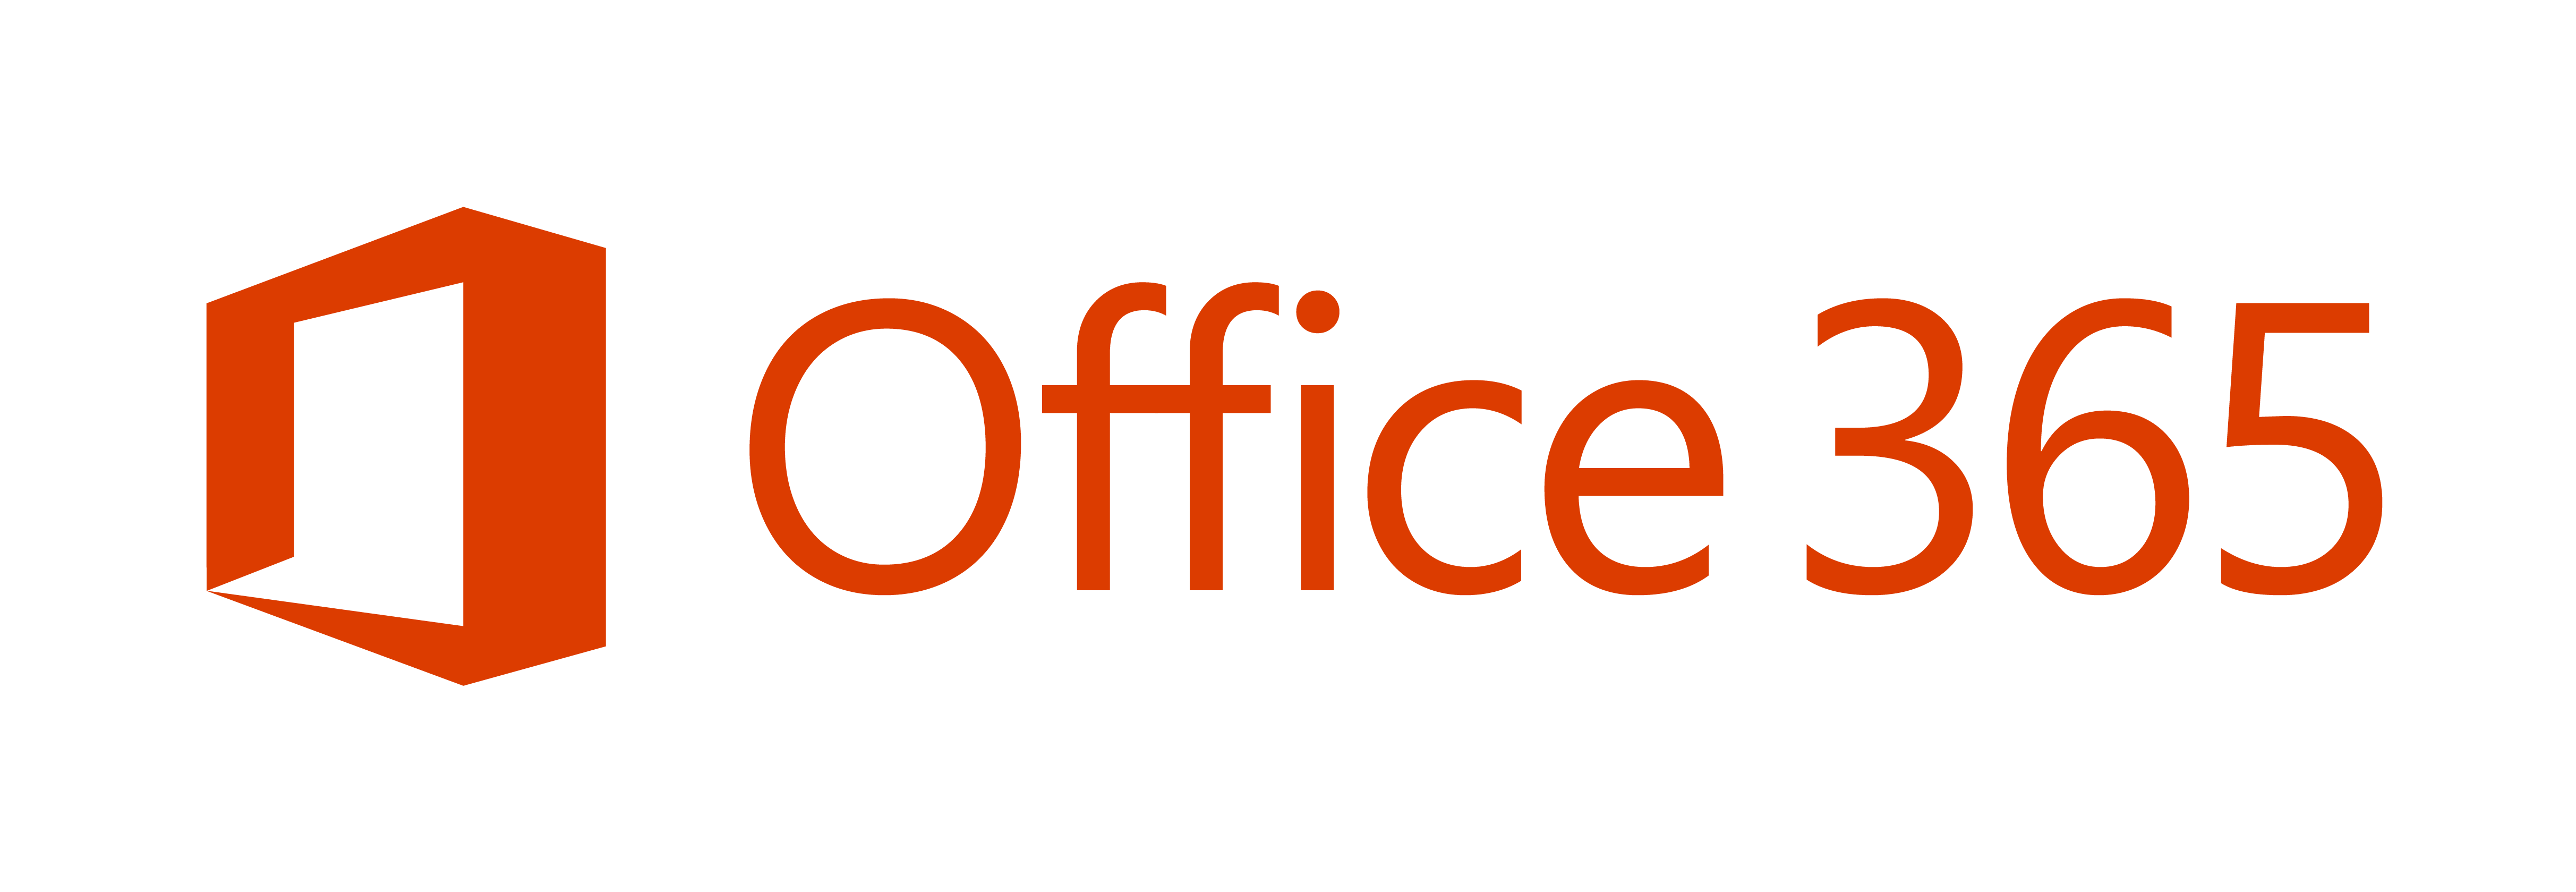 Microsoft 2013 Office 365 Logo - Office 365 for staff and students